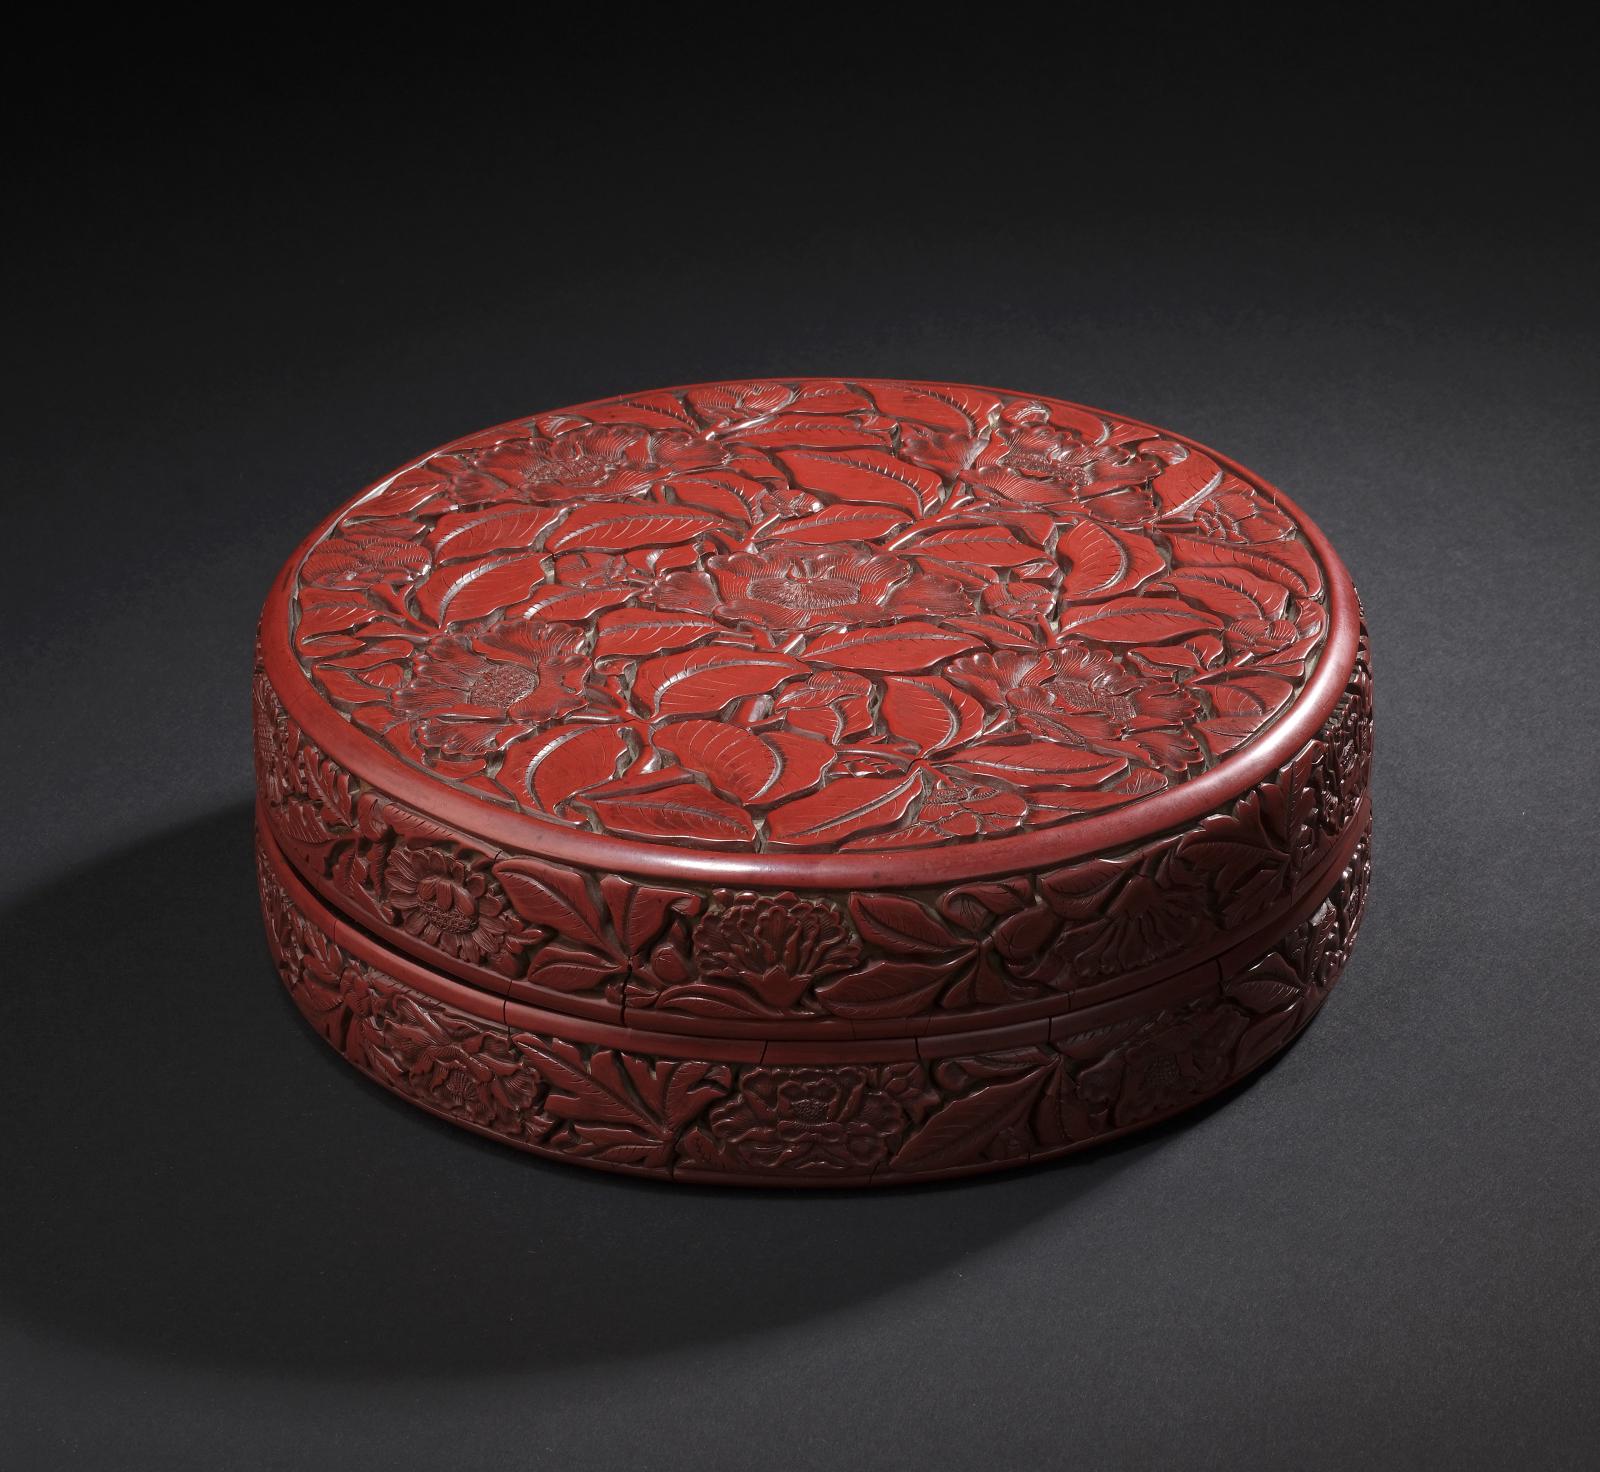 The Art of Lacquer Under Emperor Yongle: €2,060,800